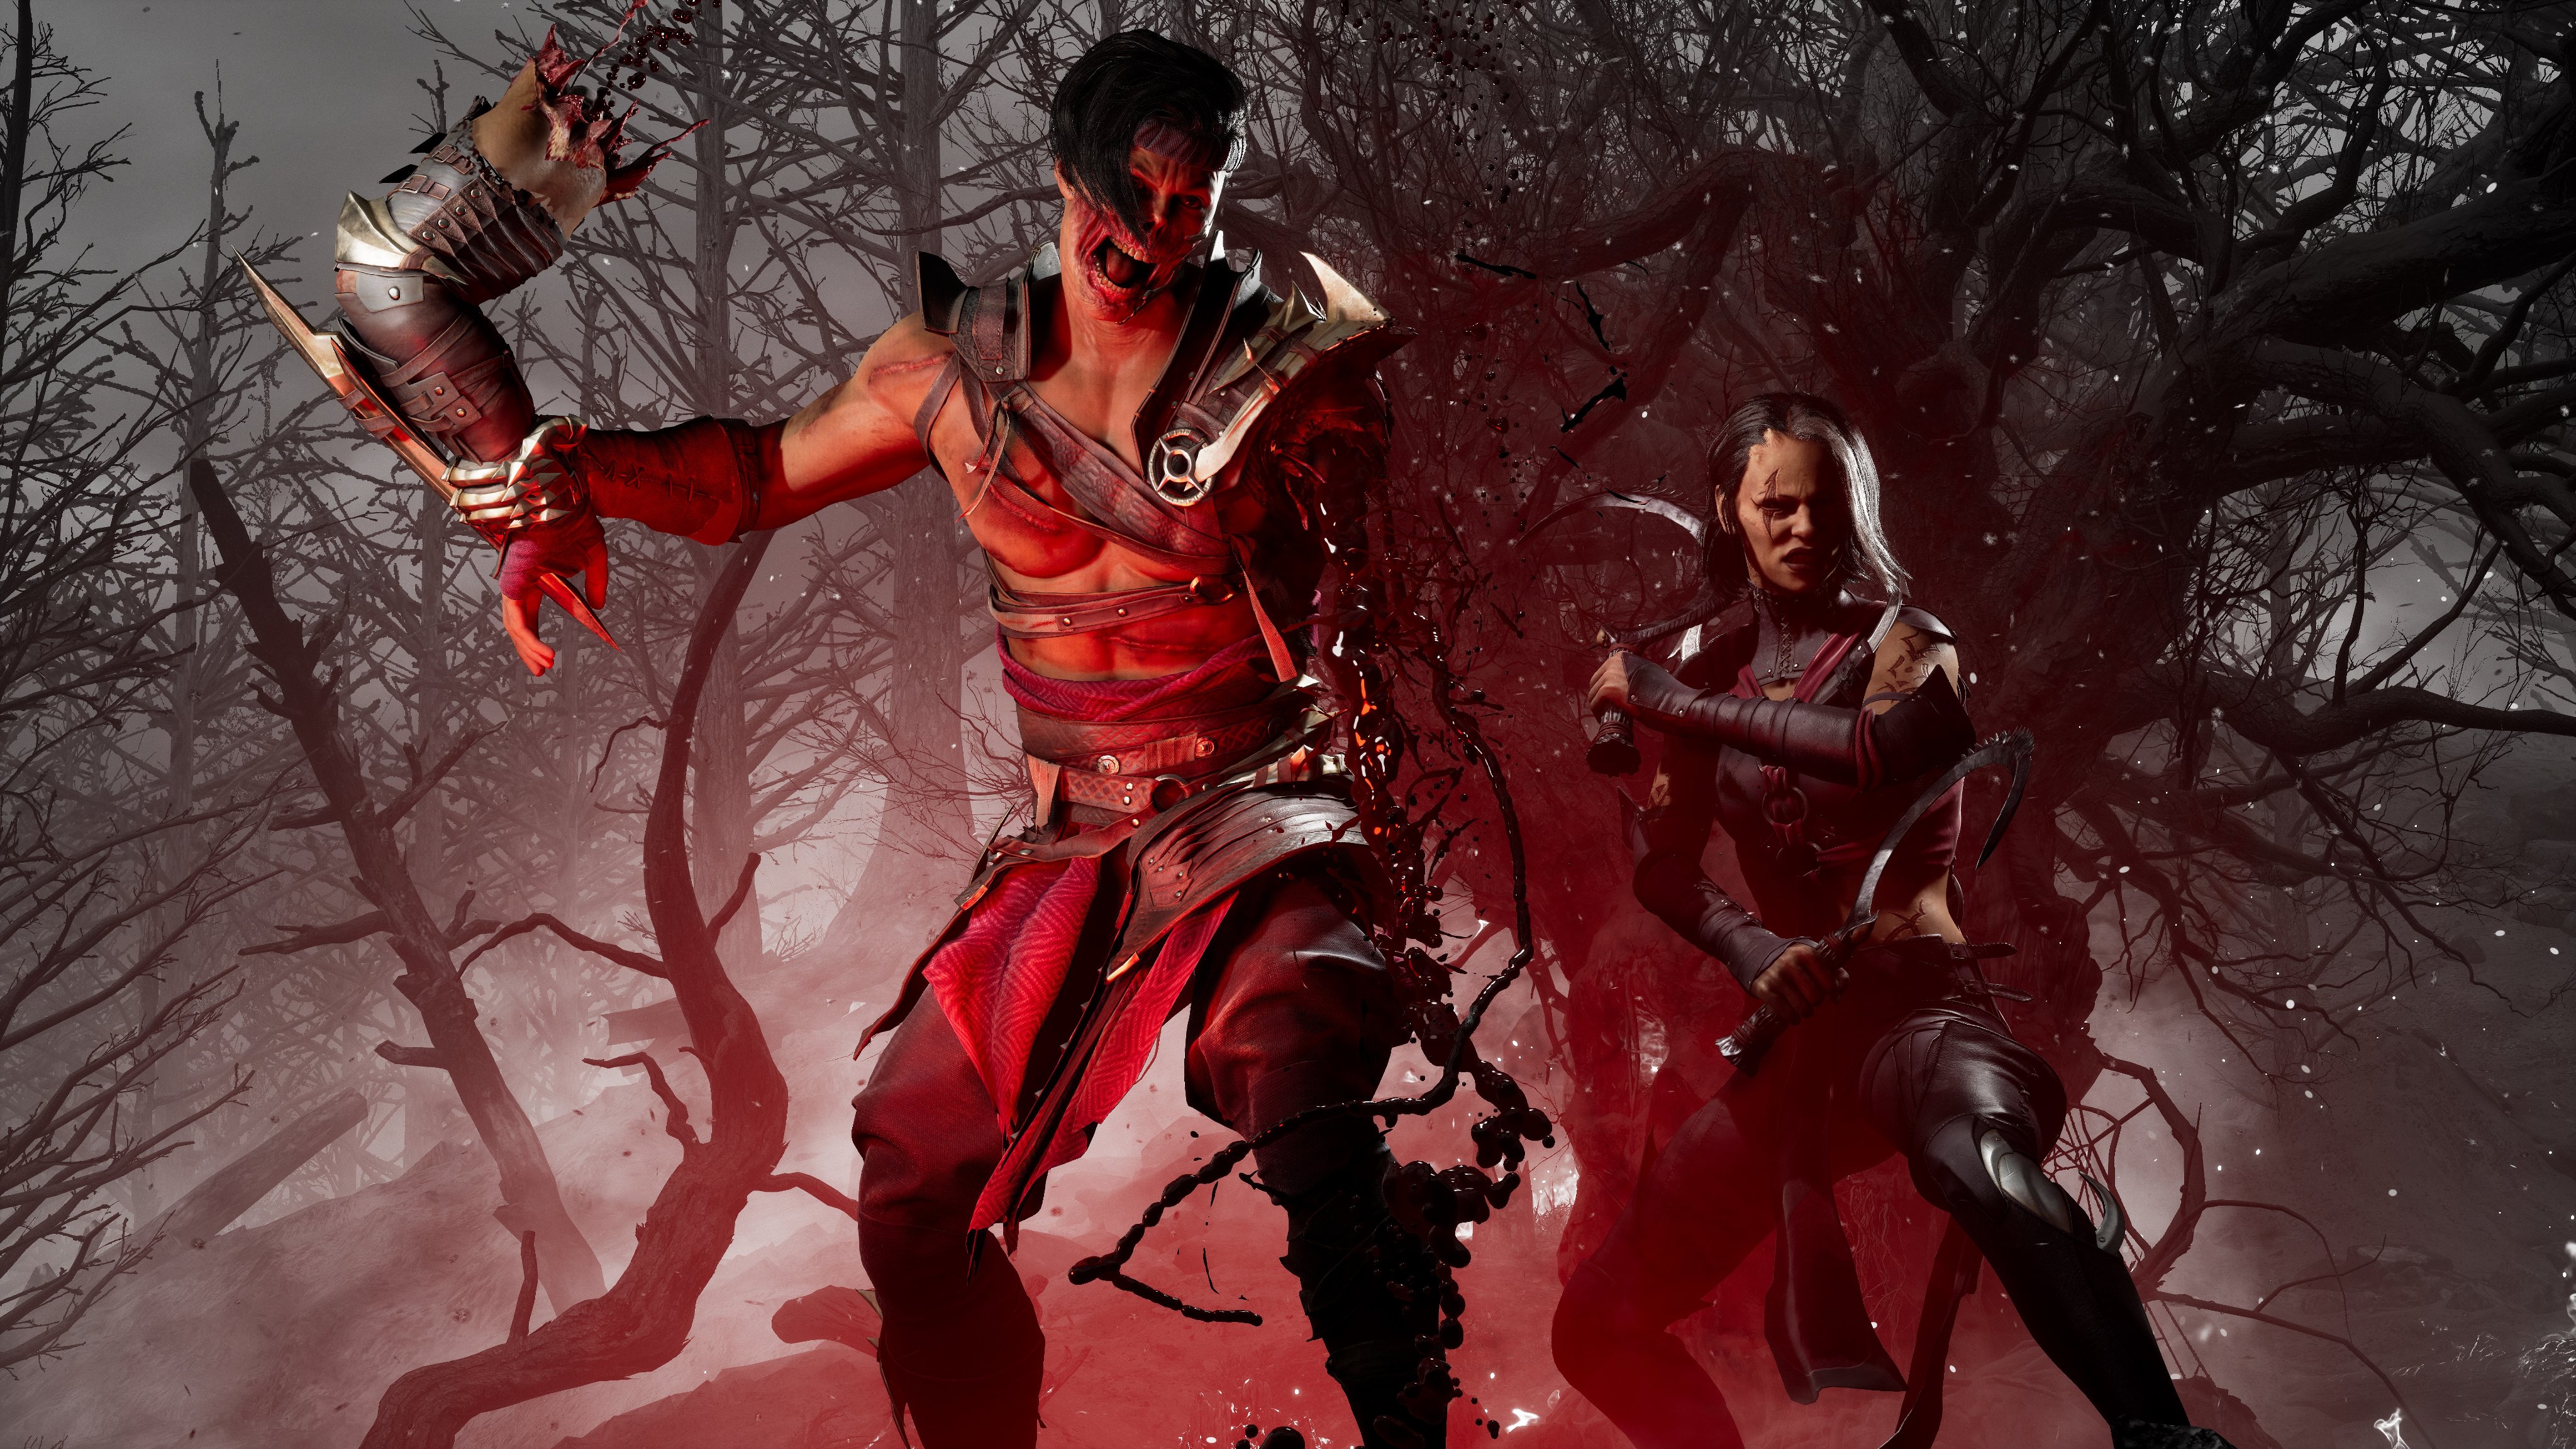 Mortal Kombat 1 Update 1.000.004 for October 2 Spears Out (Update 2)